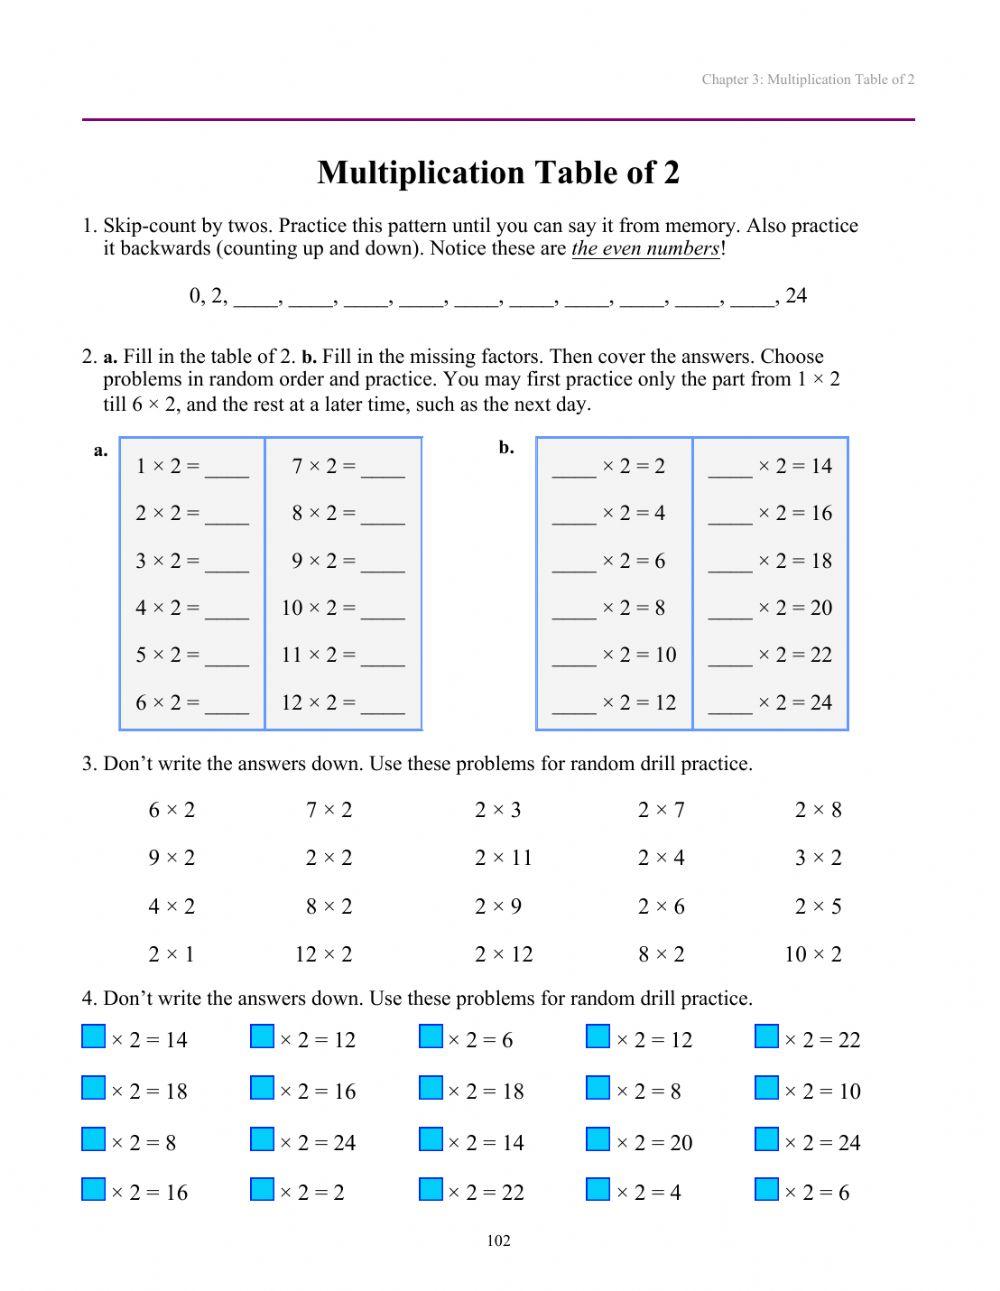 Multiplication table of 2 Second grade